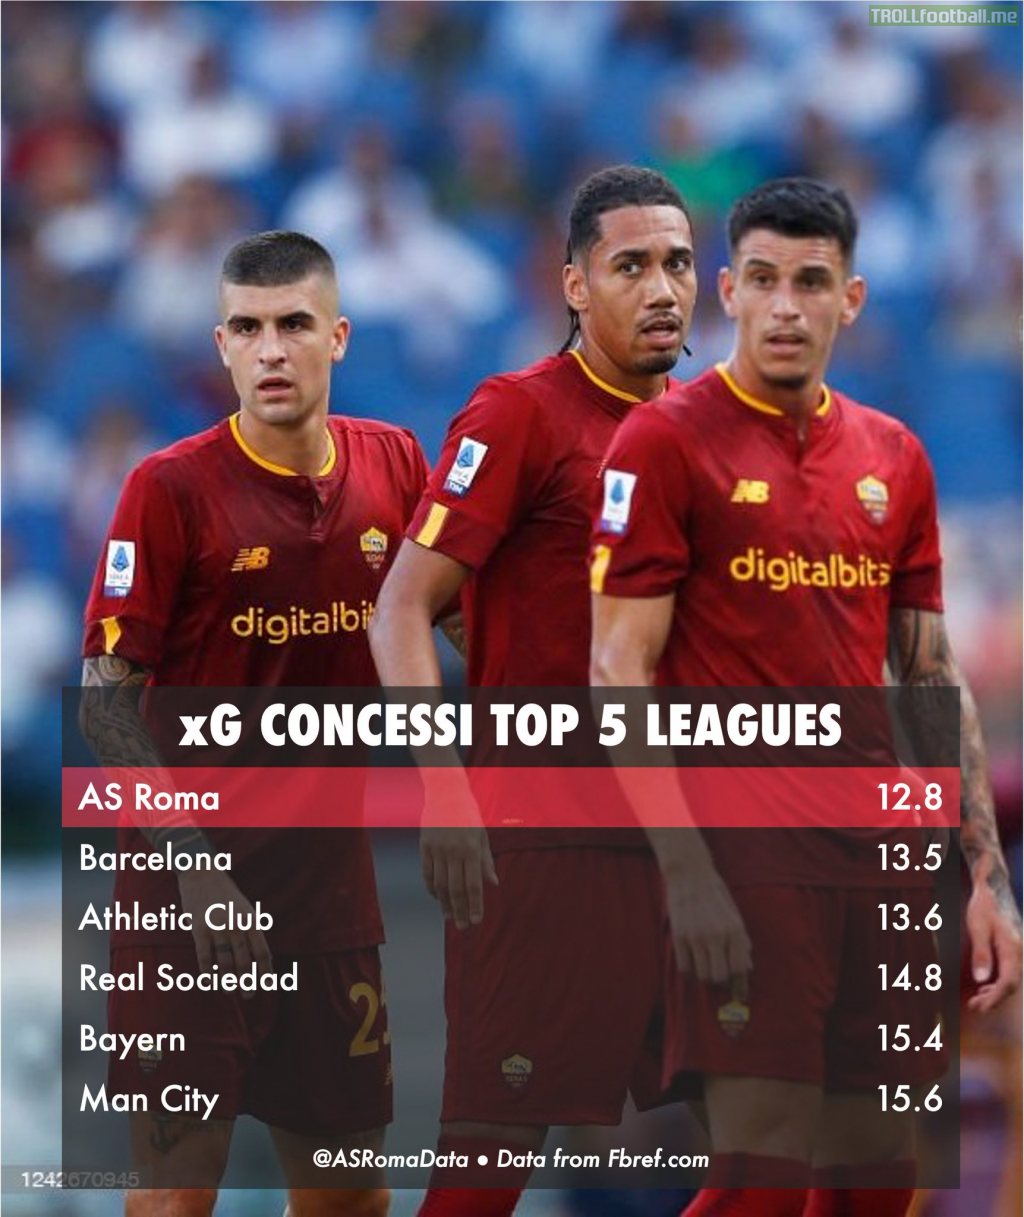 Roma Register Least Expected Goals Allowed In Top 5 Leagues